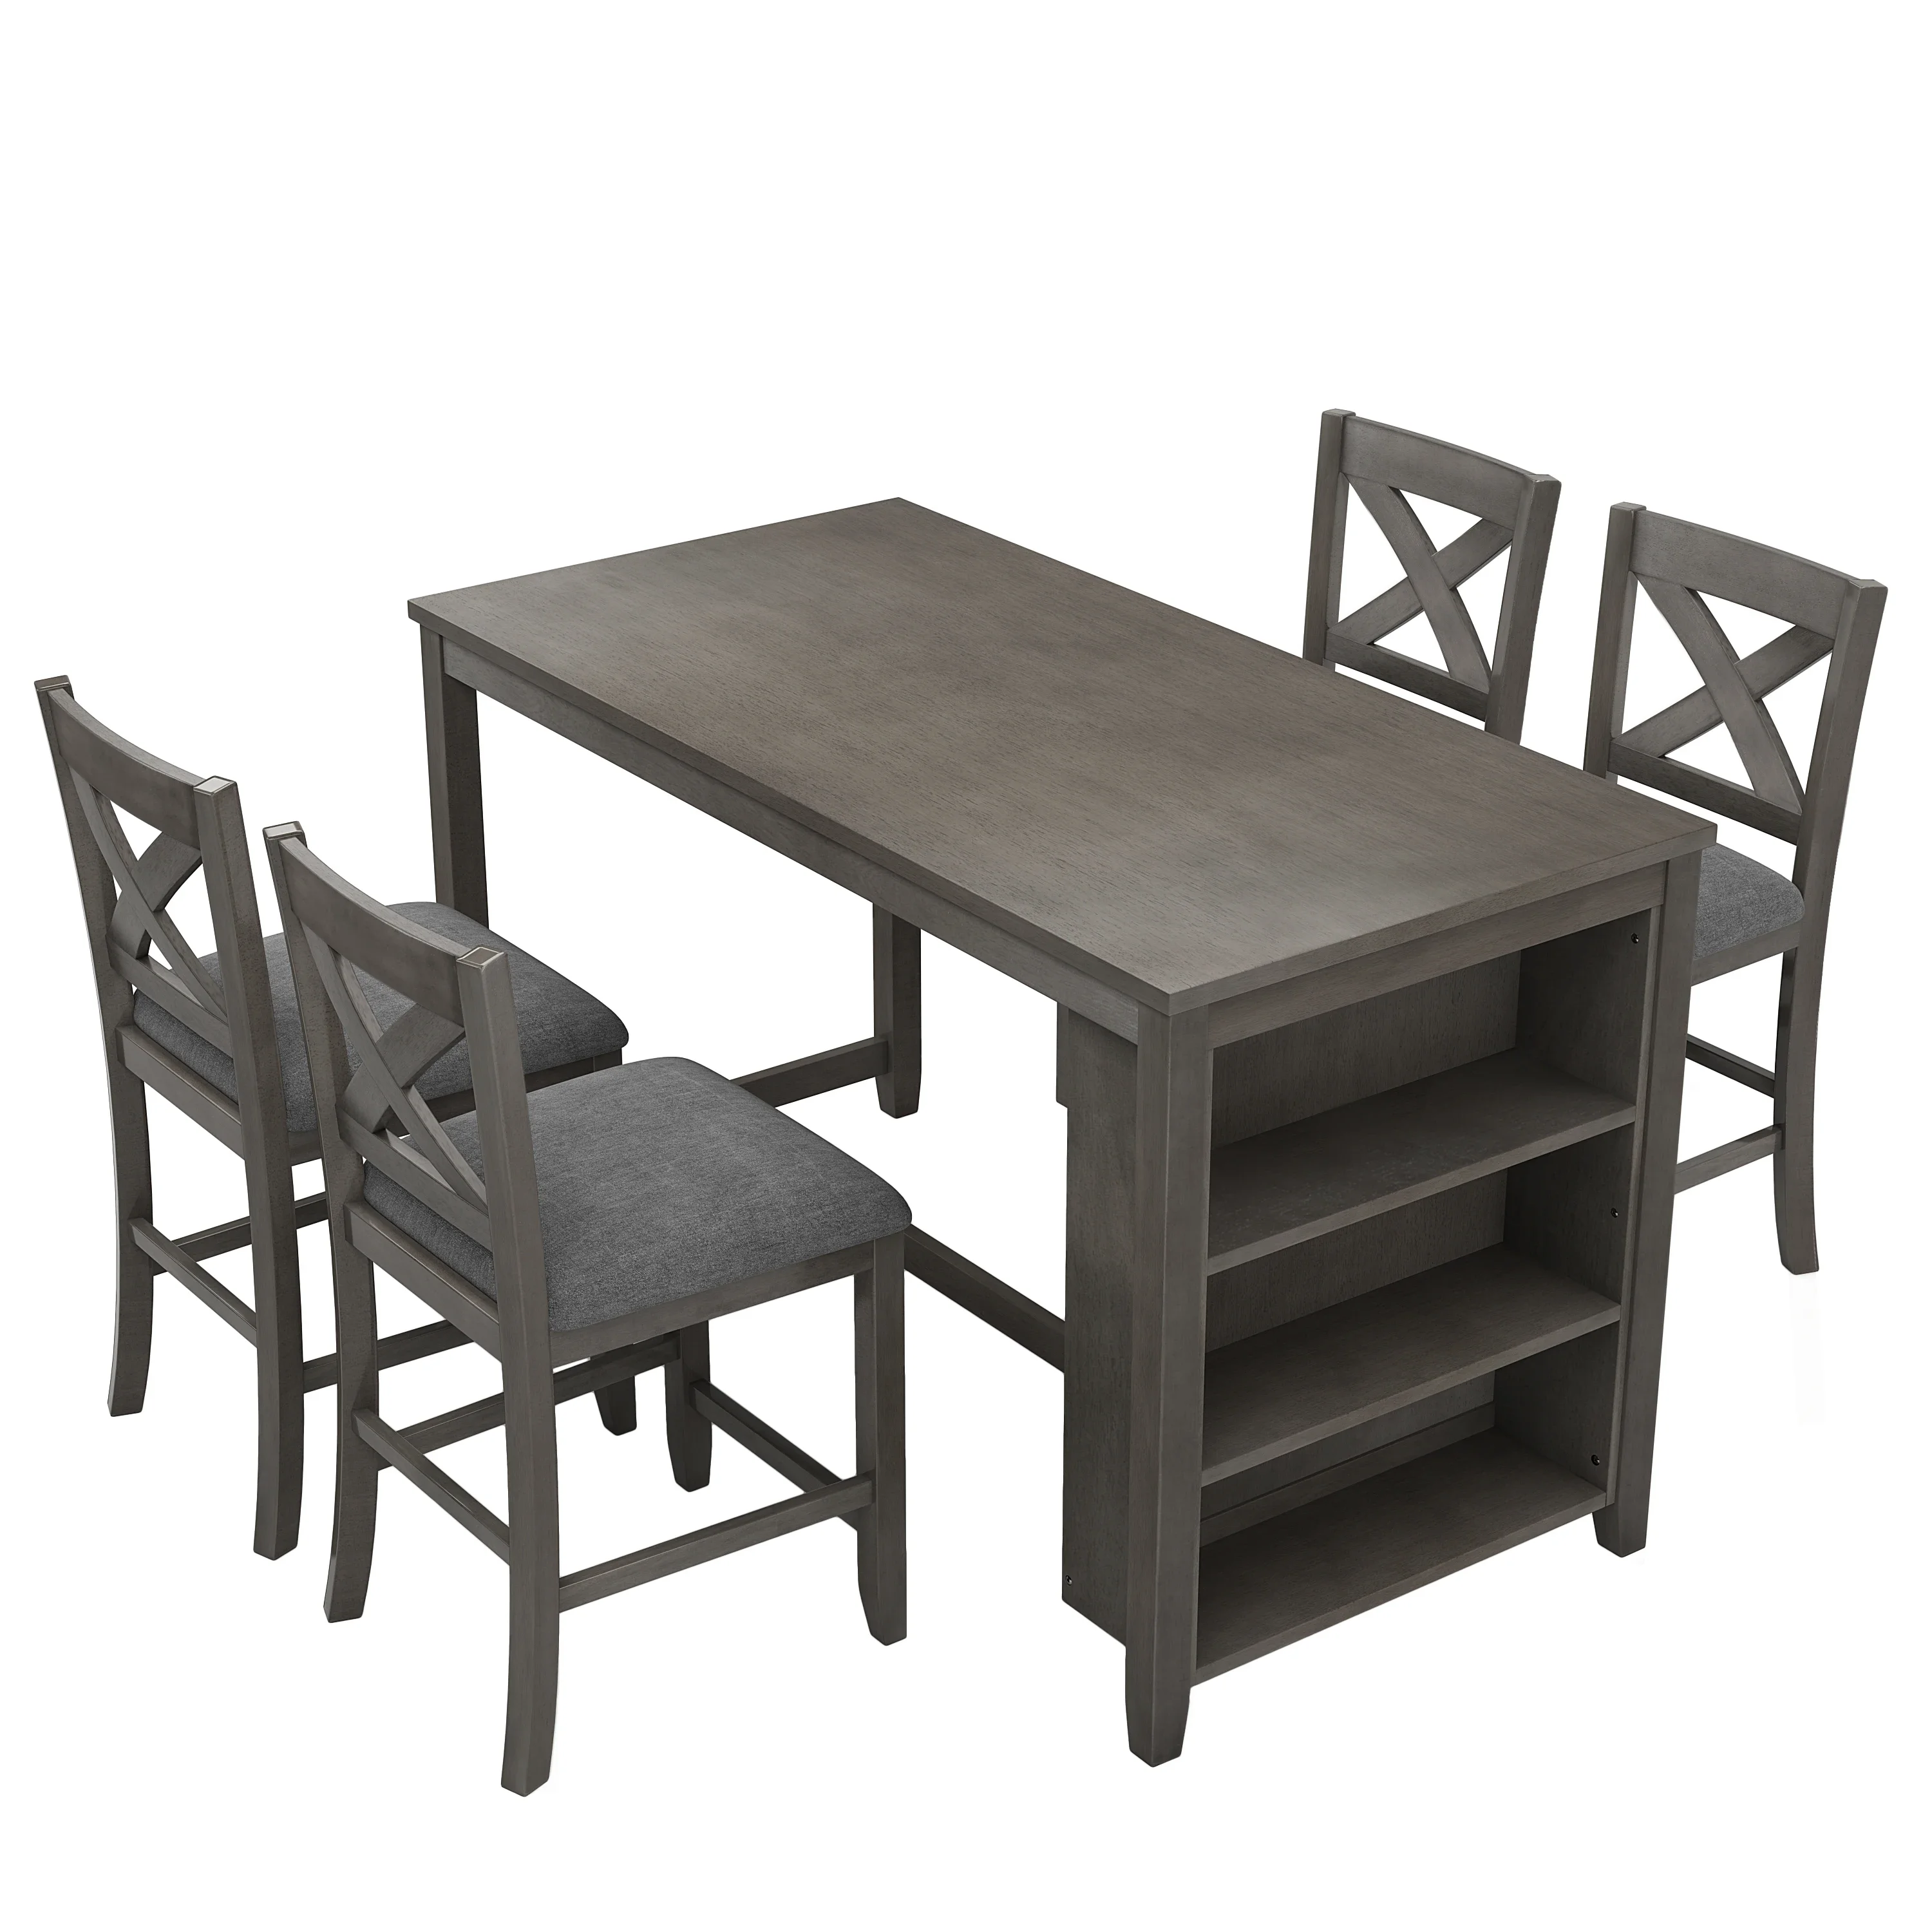 

5 Pieces Counter Height Rustic Farmhouse Dining Room Wooden Bar Table Set with 4 Chairs, Gray